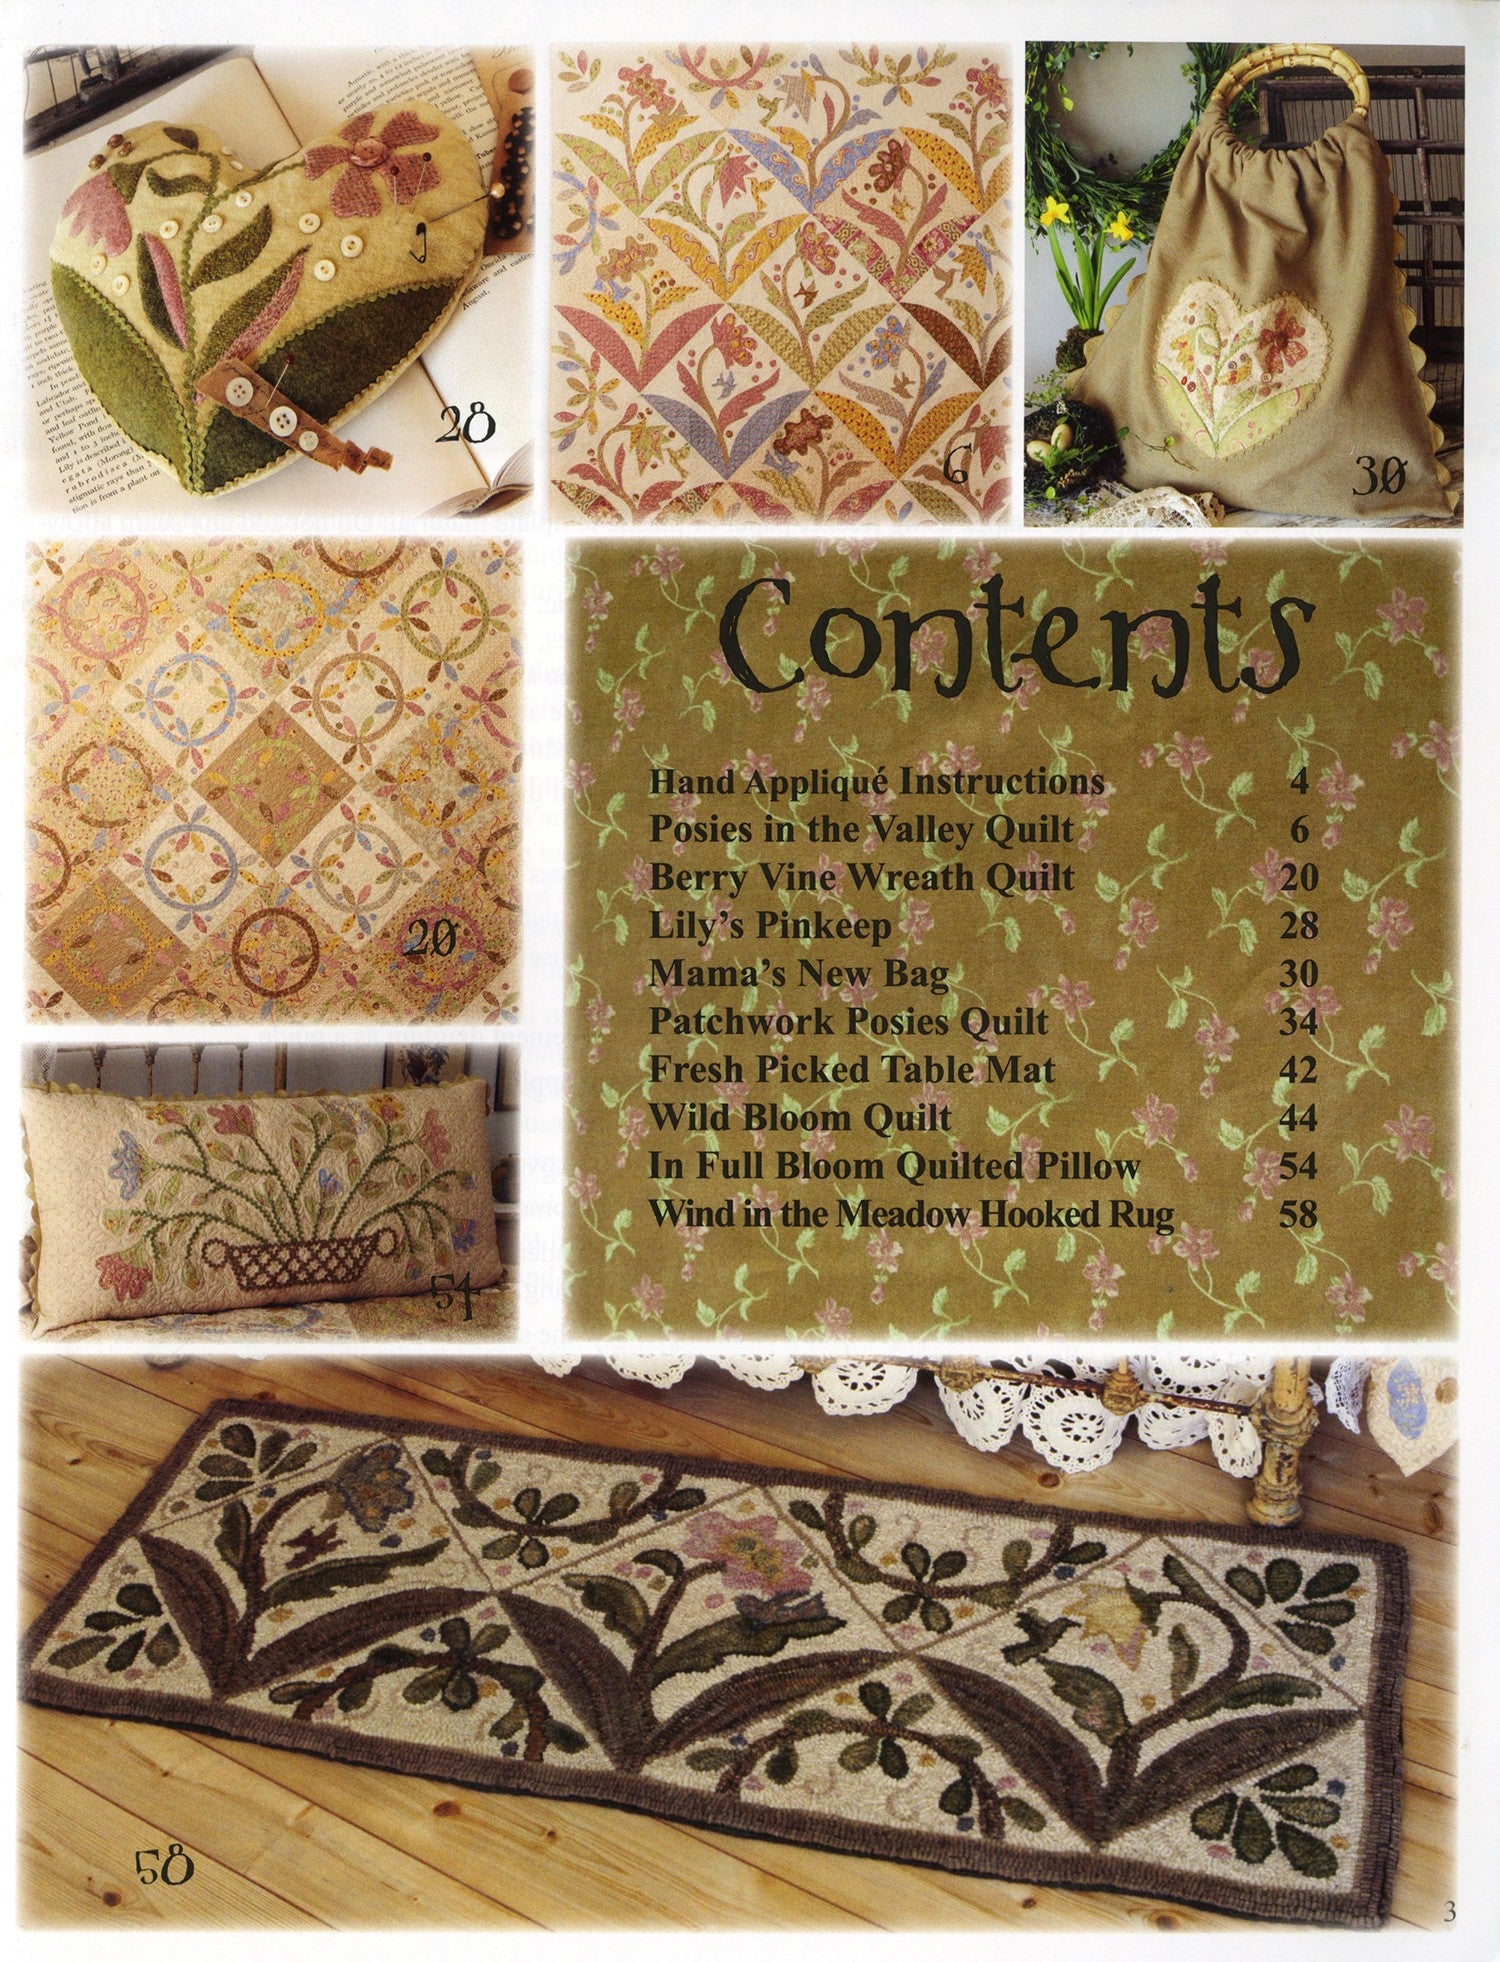 In Full Bloom Applique Quilt Pattern Book by Barb Adams and Alma Allen of Blackbird Designs